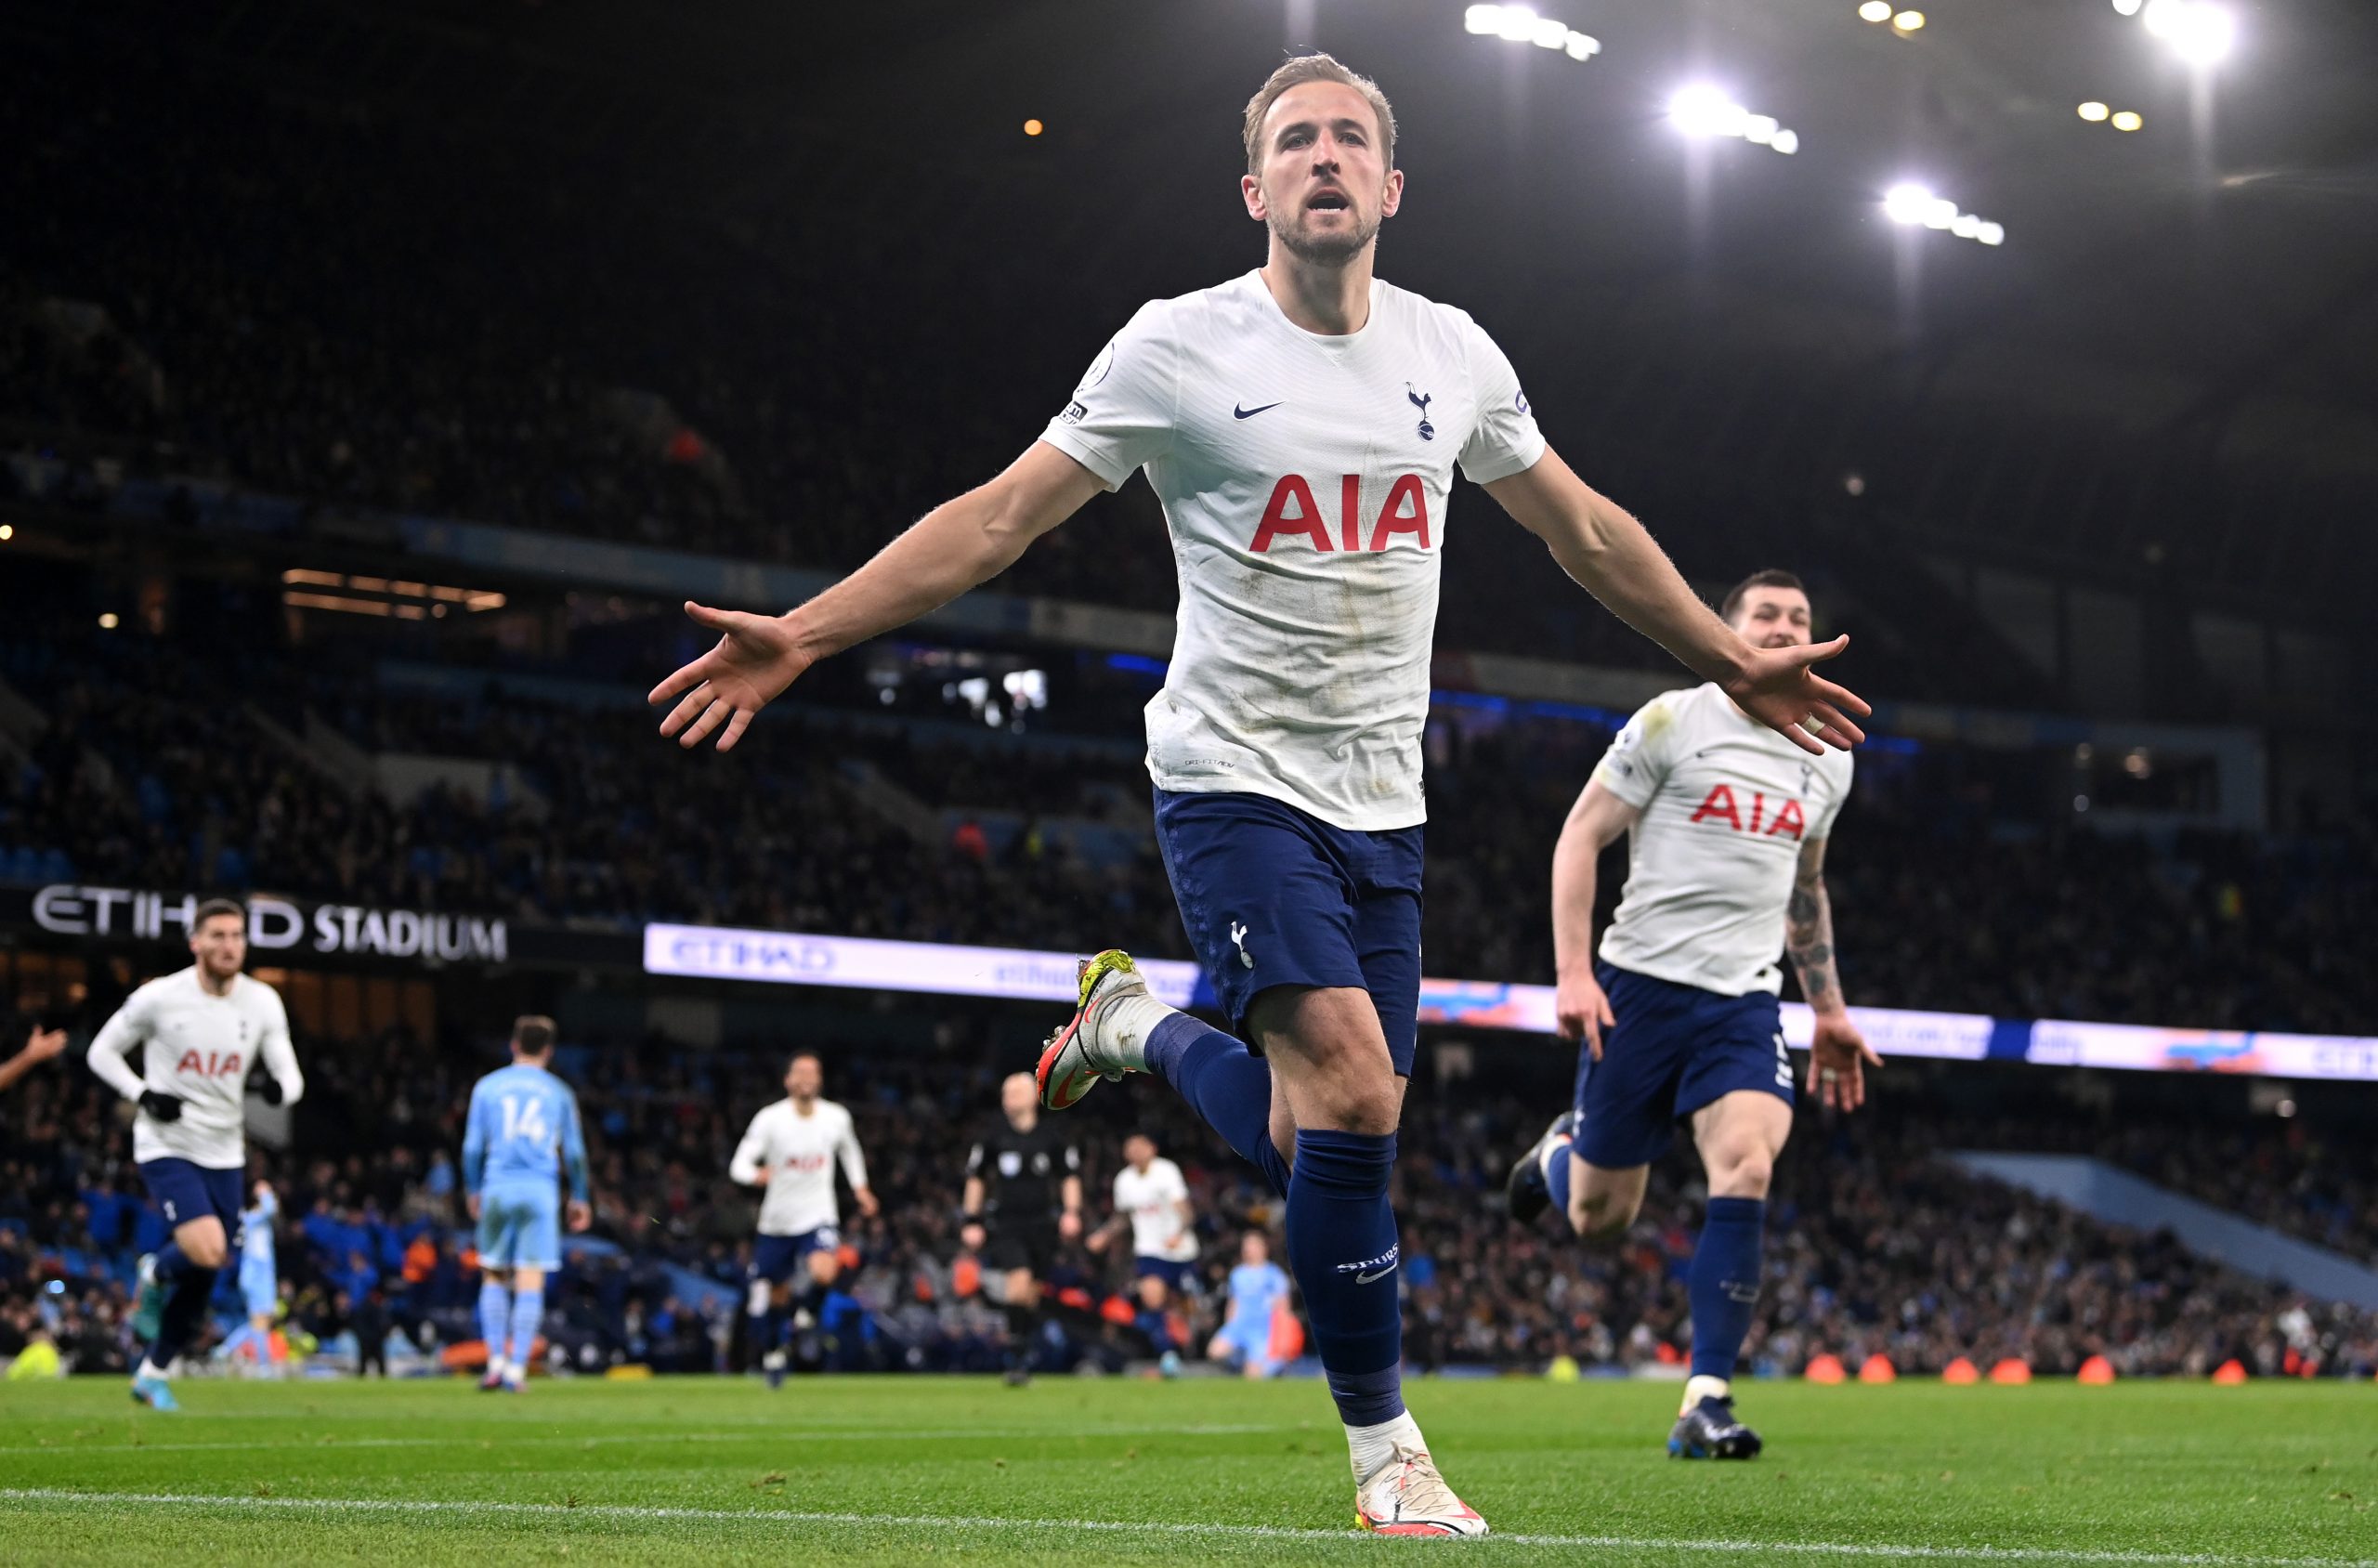 MANCHESTER, ENGLAND - FEBRUARY 19: Harry Kane of Tottenham Hotspur celebrates after scoring their side's third goal during the Premier League match between Manchester City and Tottenham Hotspur at Etihad Stadium on February 19, 2022 in Manchester, England. (Photo by Stu Forster/Getty Images)The 4th Official uses images provided by the following image agency: Getty Images (https://www.gettyimages.de/) Imago Images (https://www.imago-images.de/)